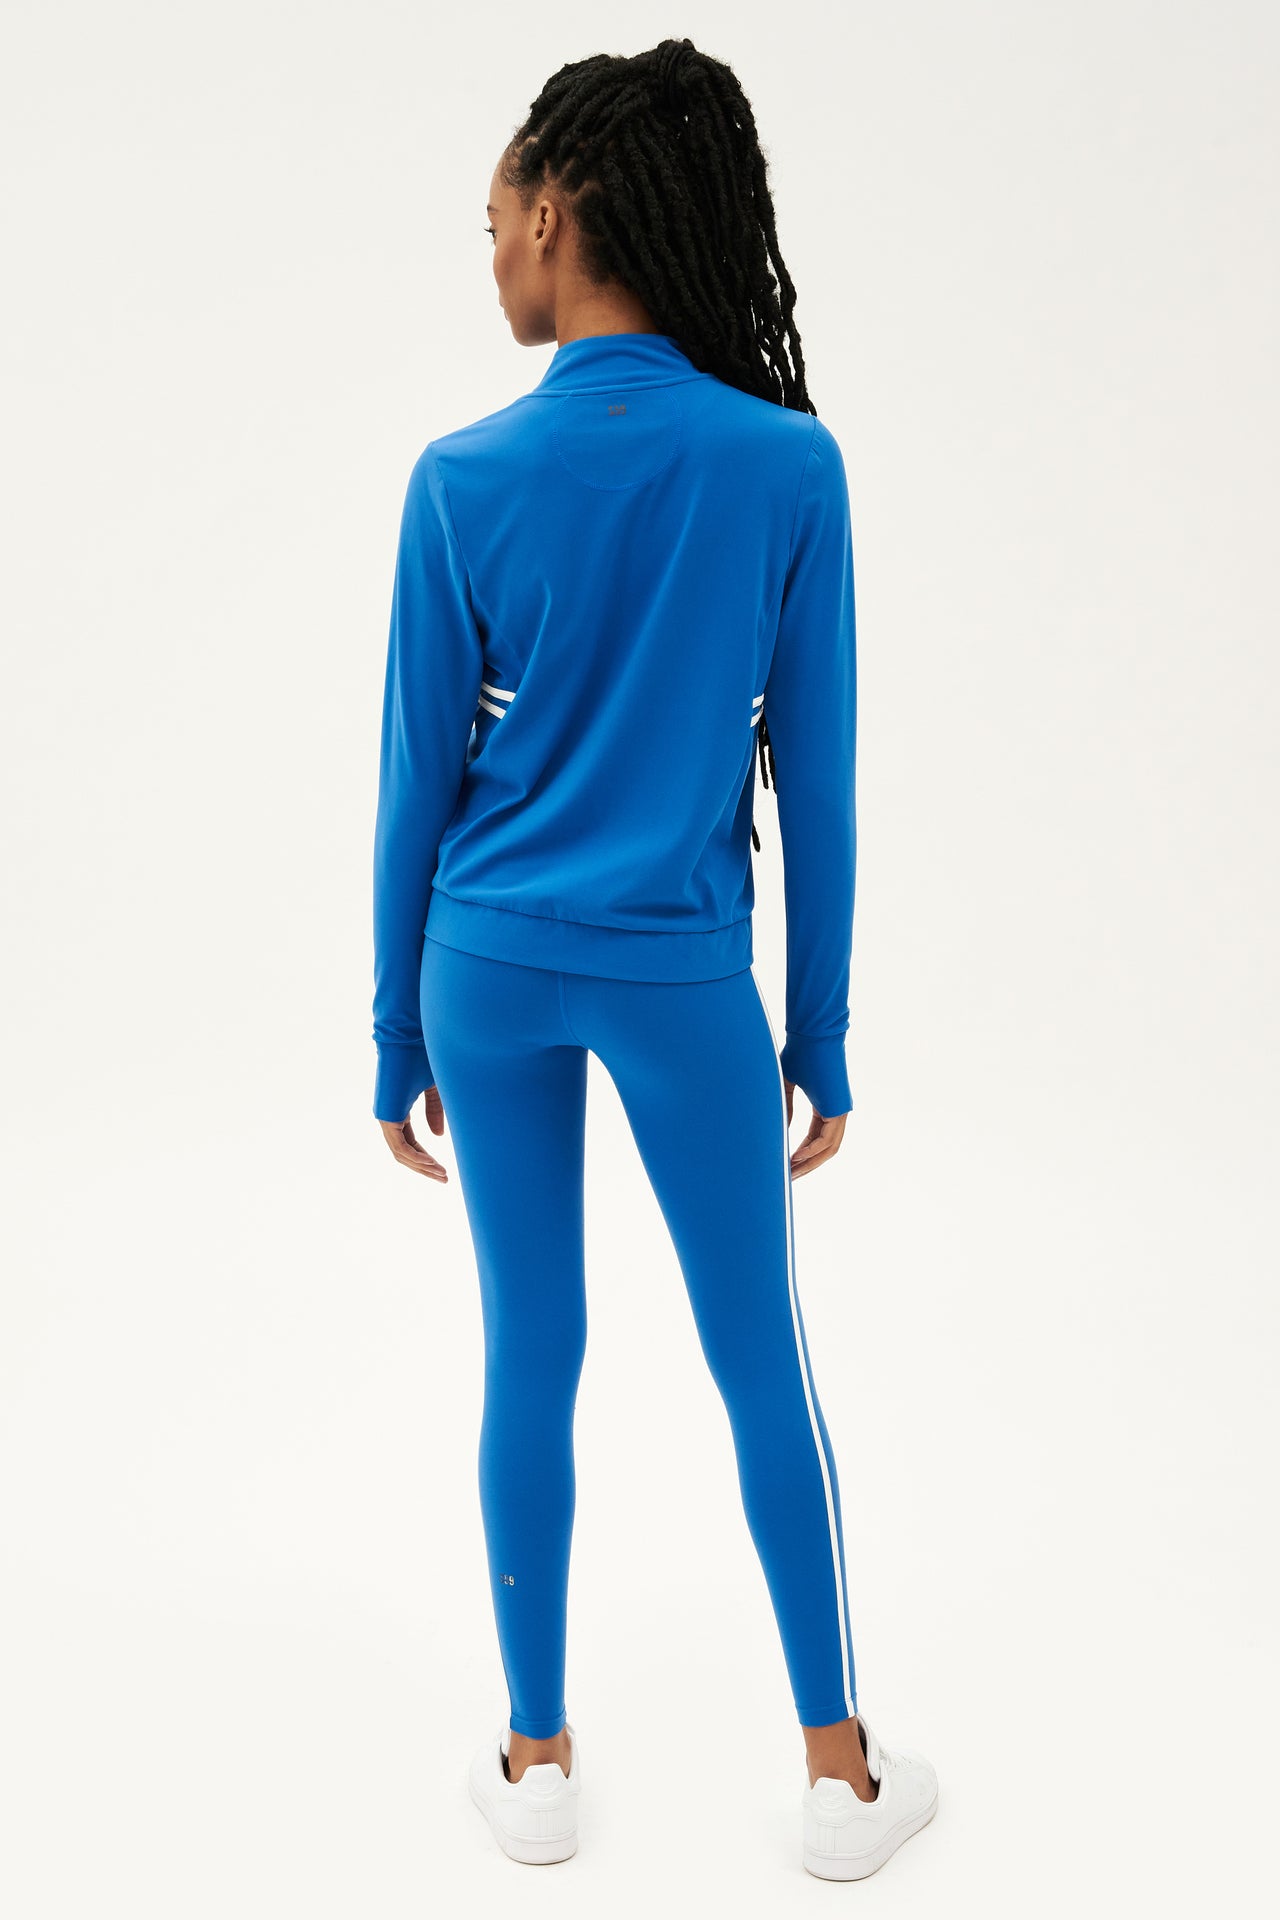 The back view of a woman in a SPLITS59 Rain Airweight Jacket - Classic Blue/White, ready for a hot yoga session.